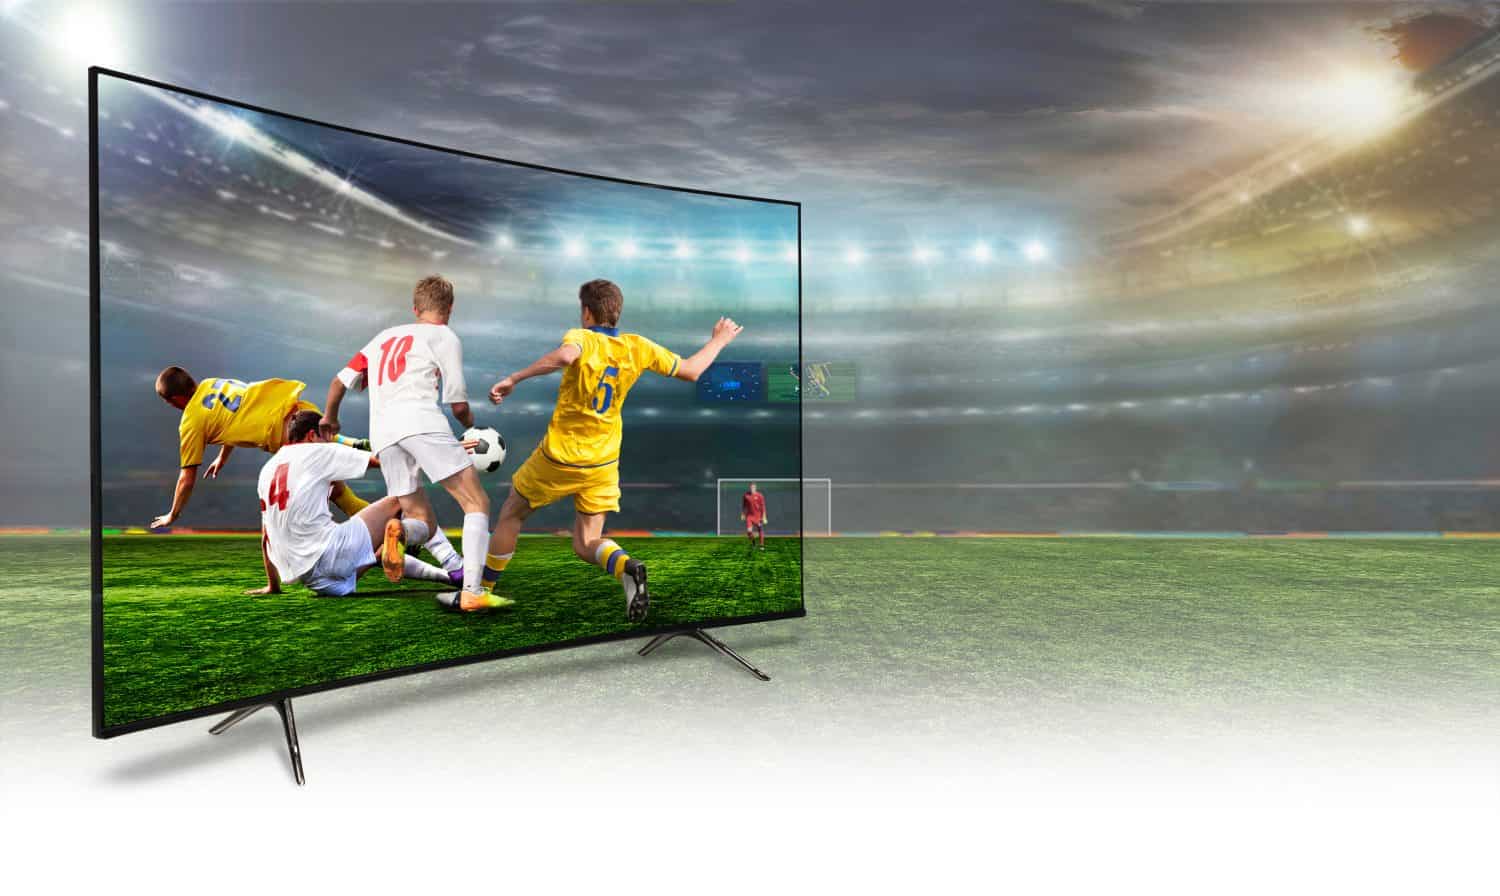 4k monitor watching smart tv translation of football game. Concept